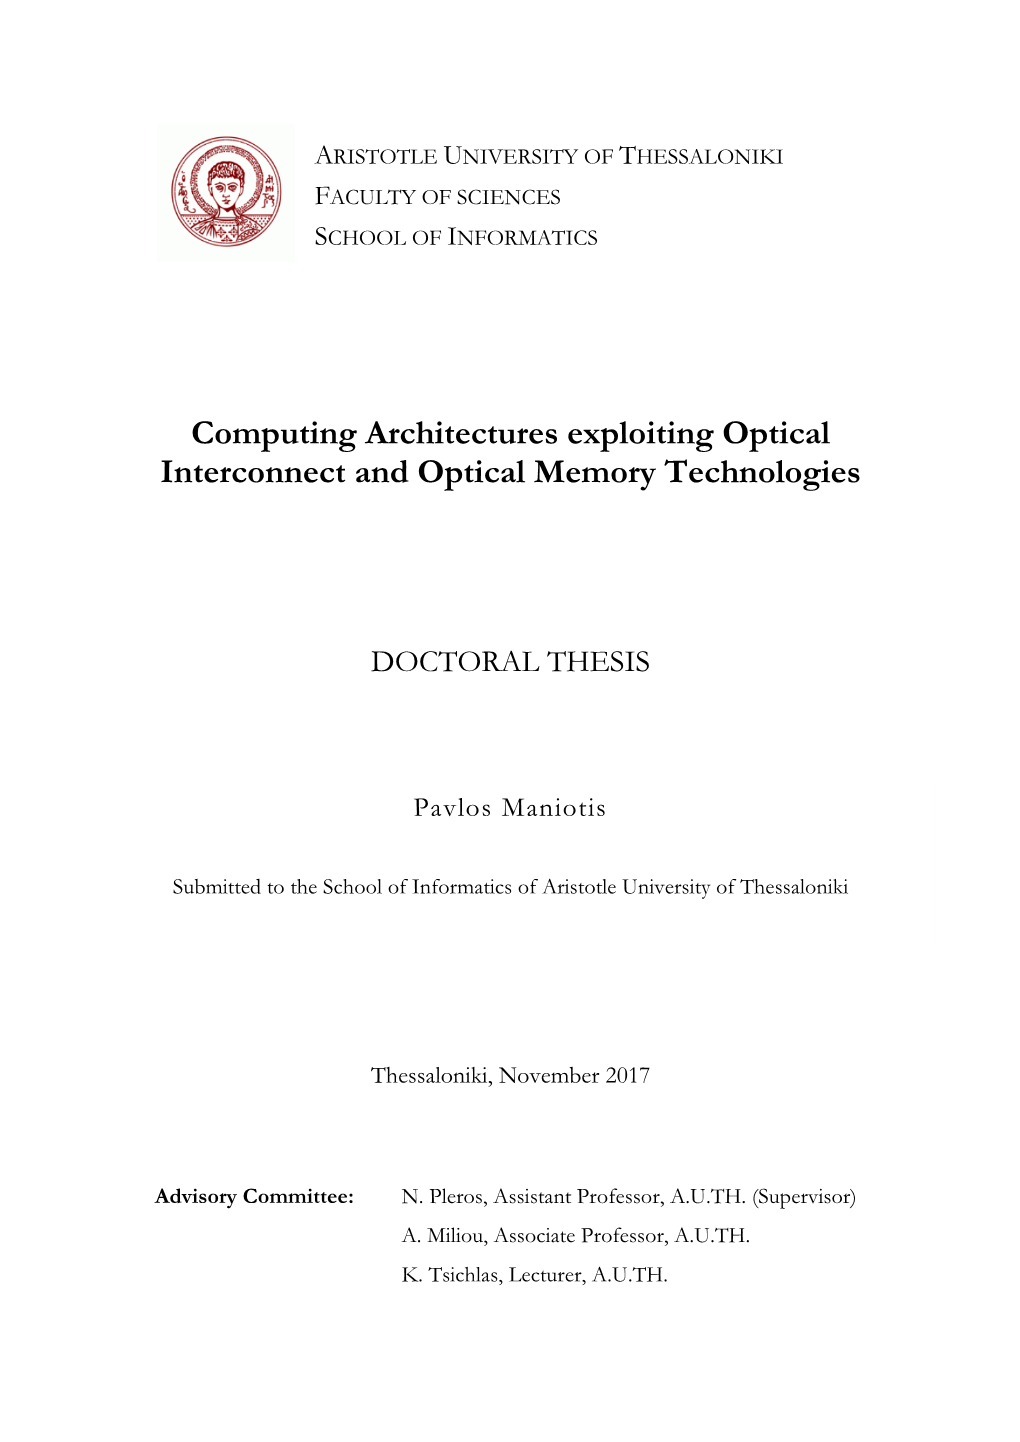 Computing Architectures Exploiting Optical Interconnect and Optical Memory Technologies